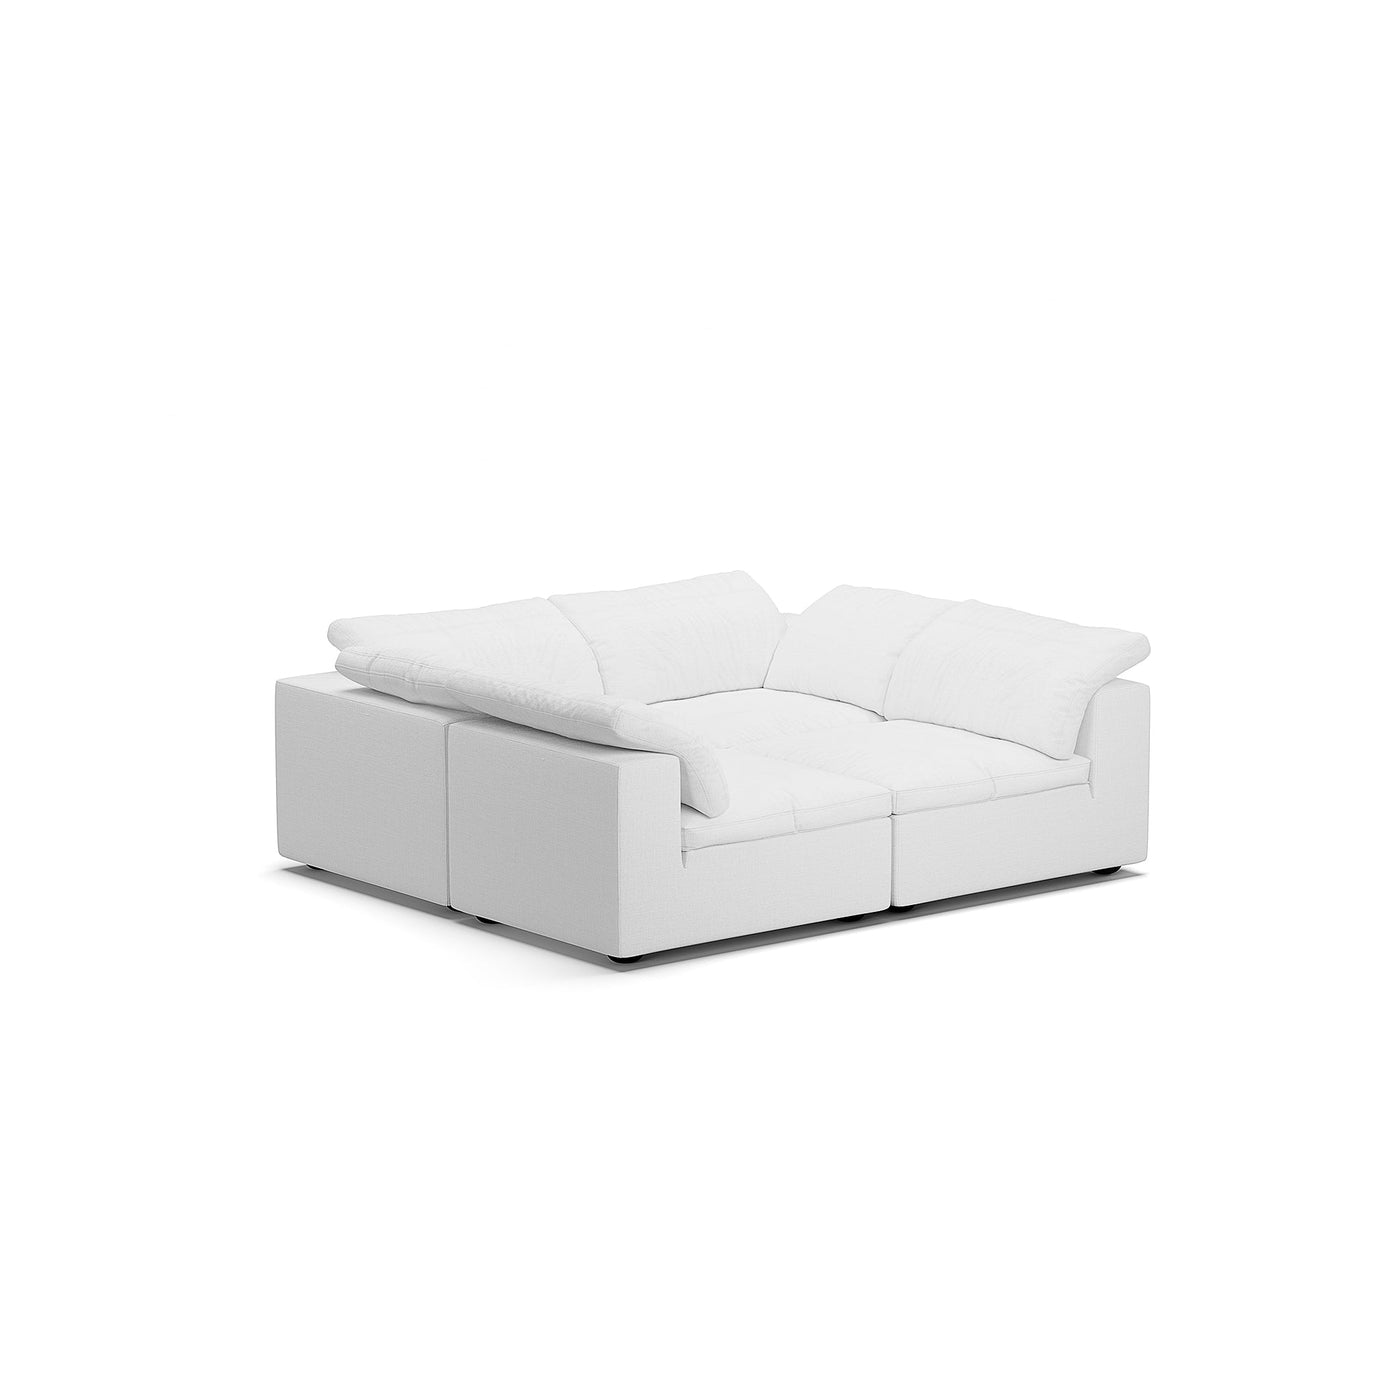 Tender Wabi Sabi Sand U Shaped Sectional with Open Ends-White-90.6"